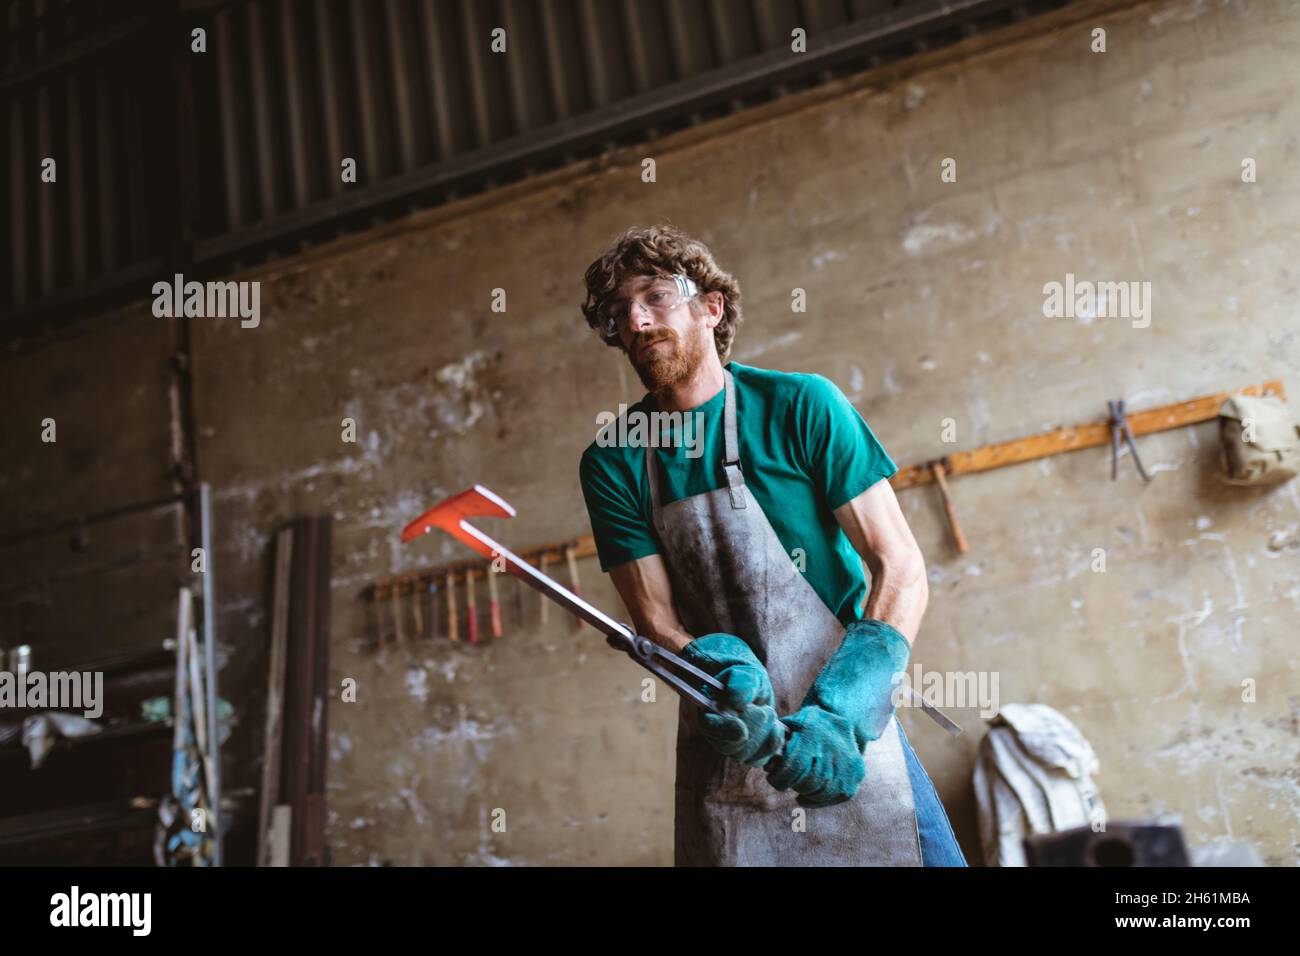 Caucasian blacksmith in protective eyewear and gloves forging in metal industry Stock Photo